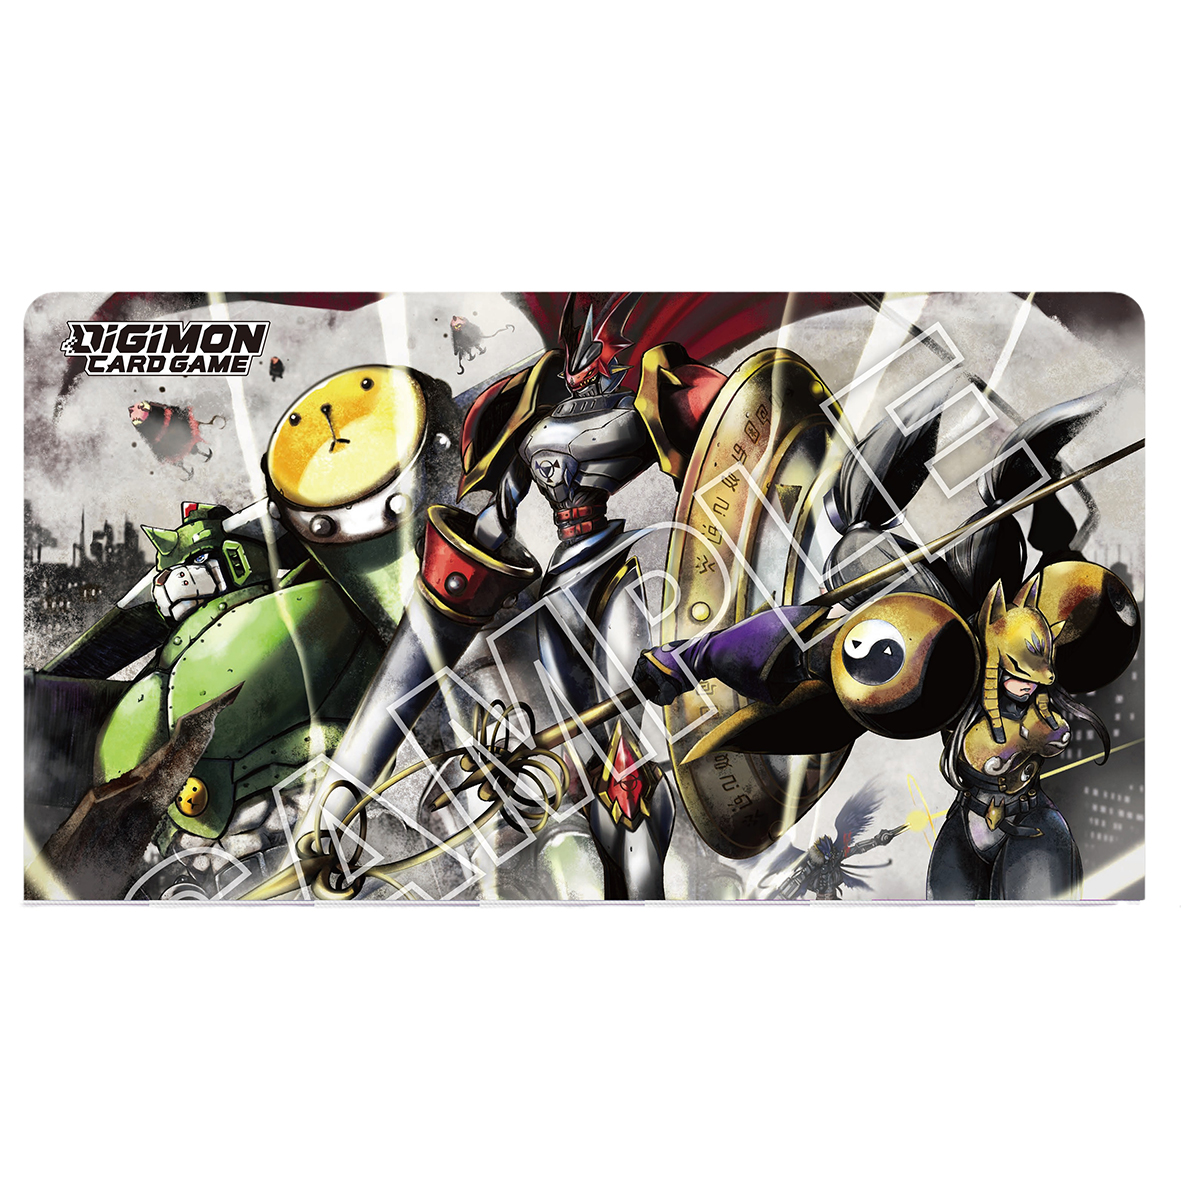 Digimon Card Game Playmat and Card Set 1 -Digimon Tamers- 【September 2022 delivery】